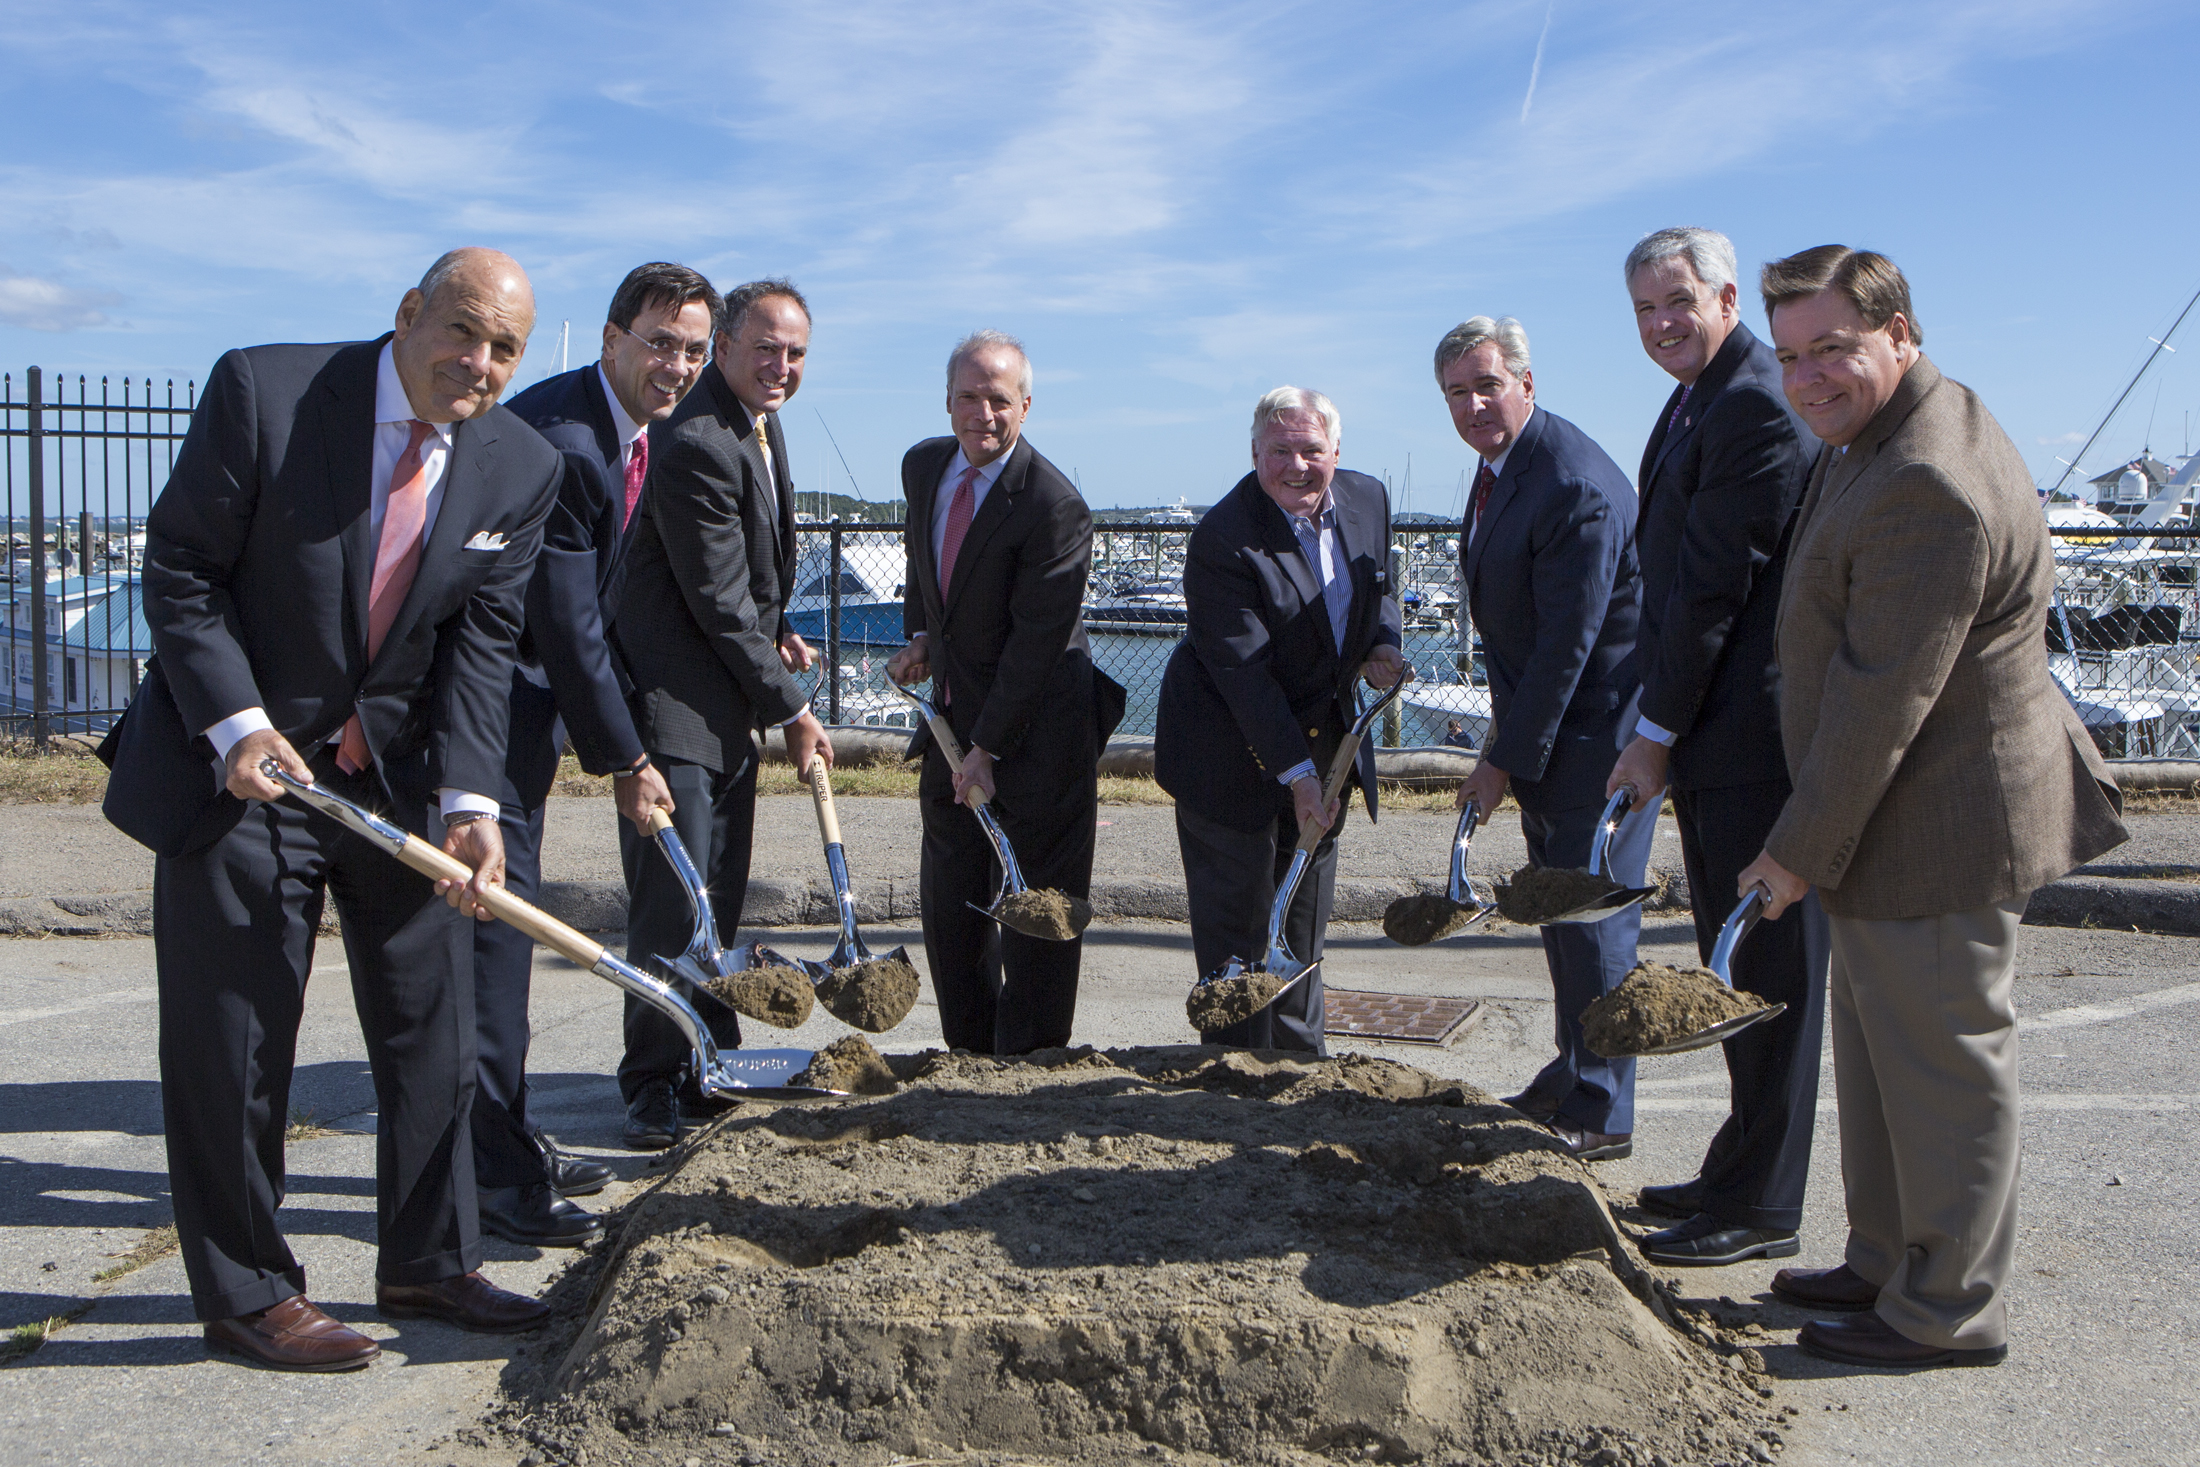 From left to right:  Howard Elkus, Elkus Manfredi; Hines Managing Director Jim Dunlop; MetLife Director Don Svoboda; Hines Senior Managing Director David Perry; Chairman of the Quincy Planning Board William Geary; Massachusetts State Representative Bruce J. Ayers; Massachusetts State Senator John F. Keenan; Quincy Mayor Tom Koch